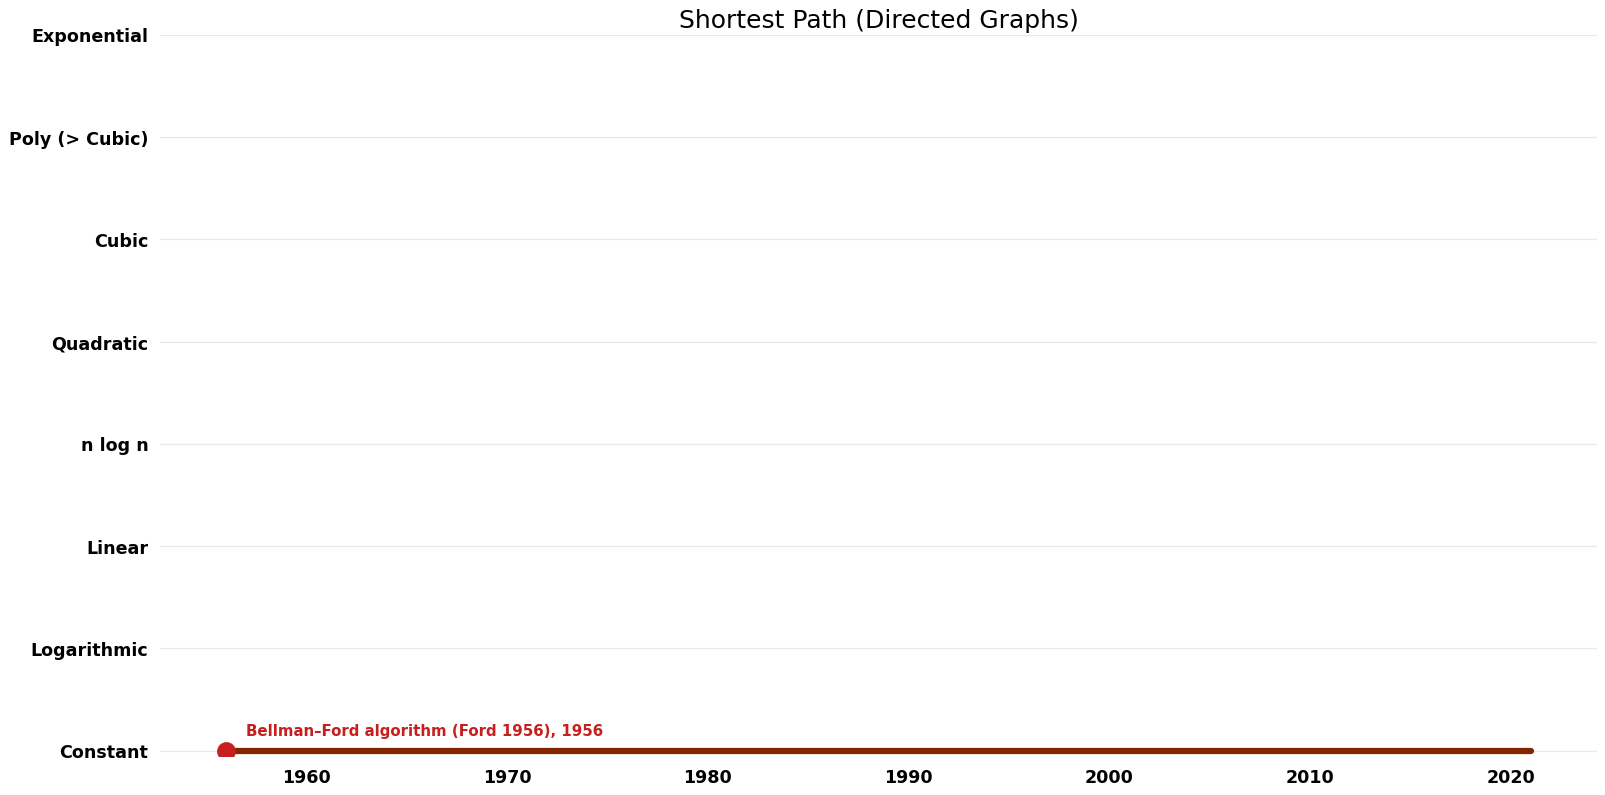 File:Shortest Path (Directed Graphs) - Space.png